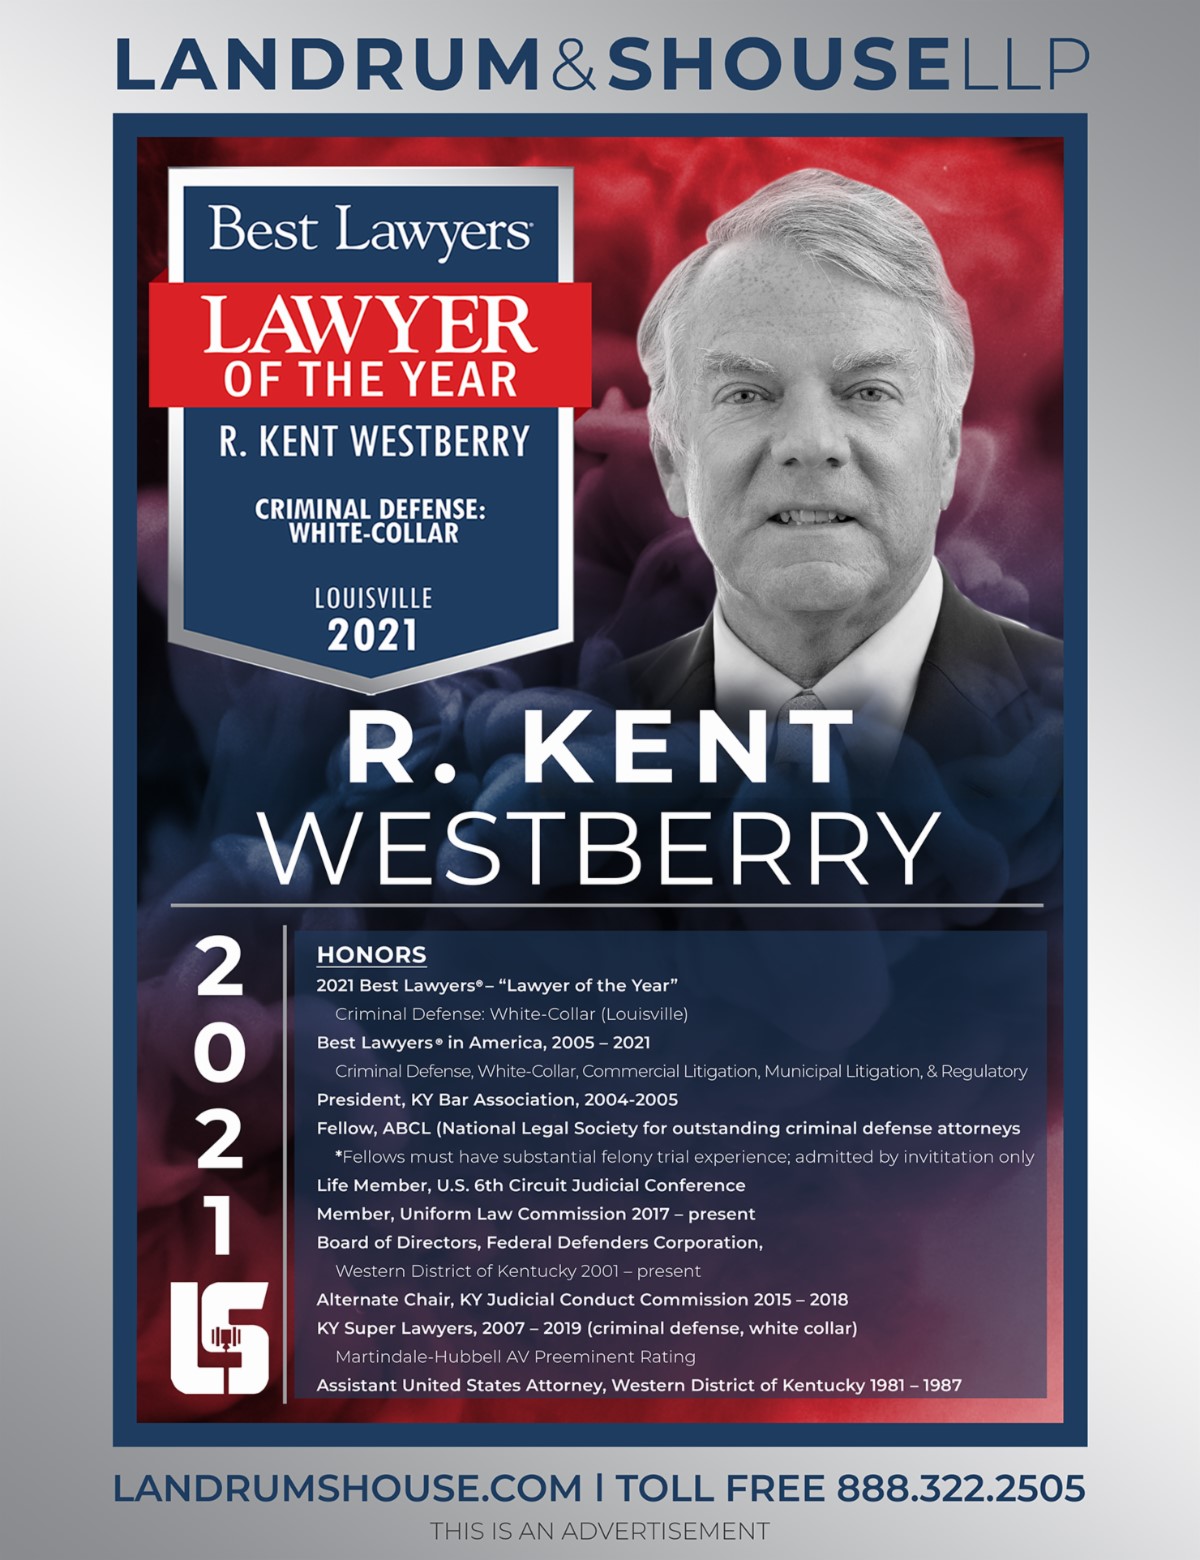 Landrum & Shouse LLP | Best Lawyers | Lawyer Of The Year | R. Kent Westberry | Criminal Defense : White-Collar | Louisville 2021